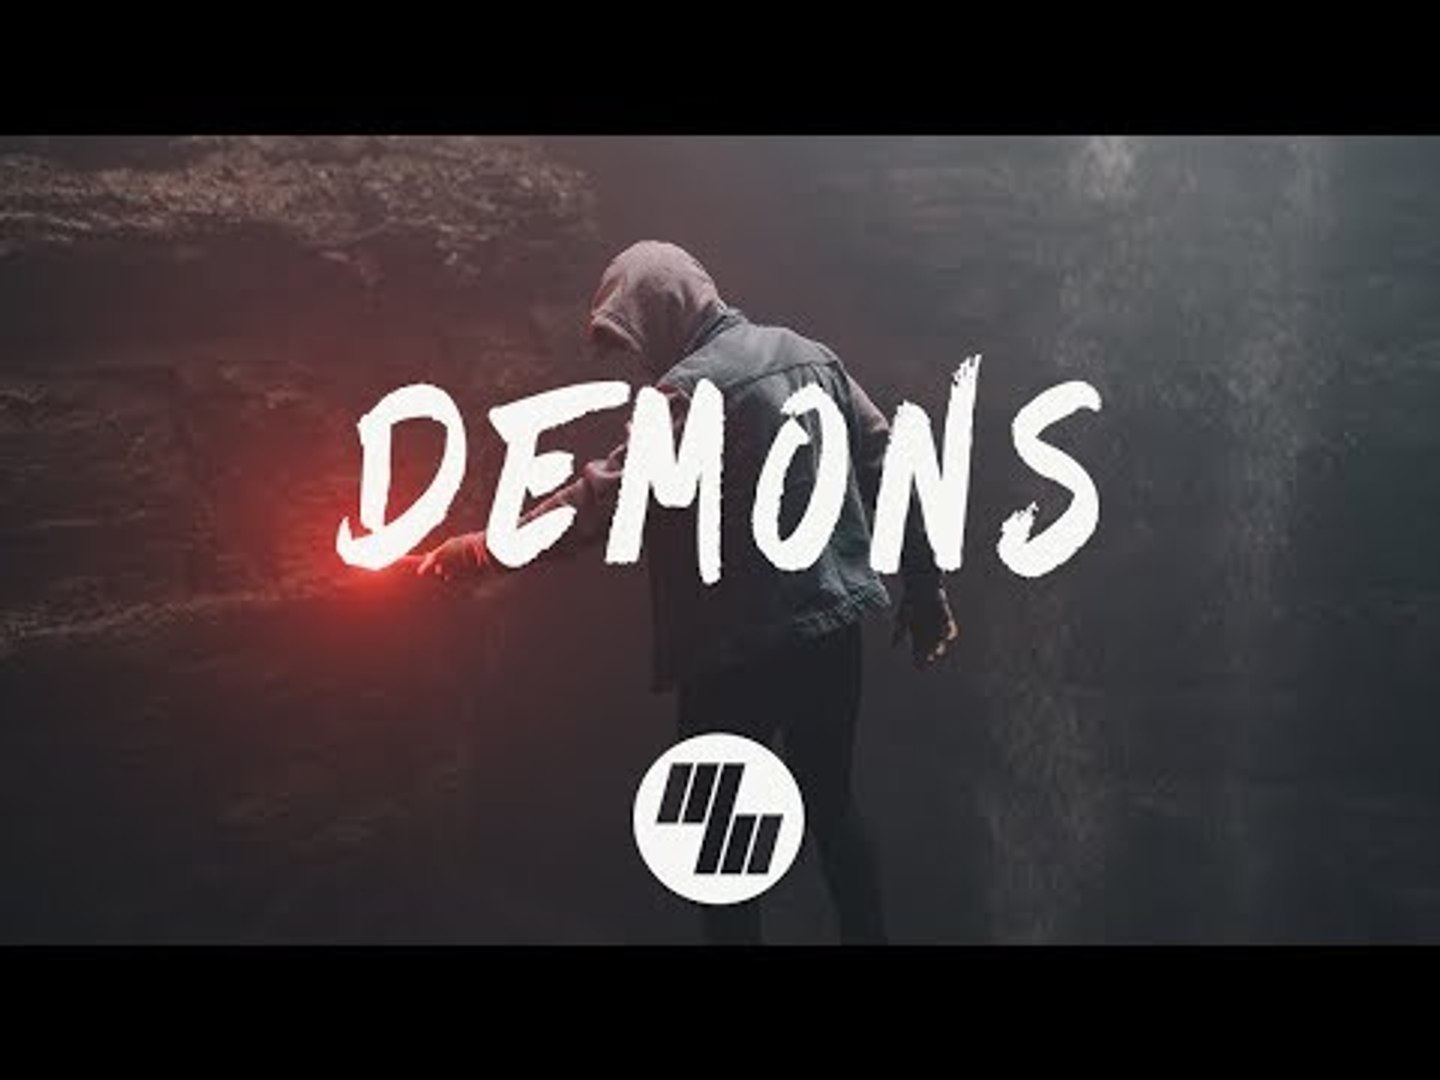 Felix Snow Rozes Demons Lyrics Video Dailymotion Includes album cover, release year, and user reviews. felix snow rozes demons lyrics